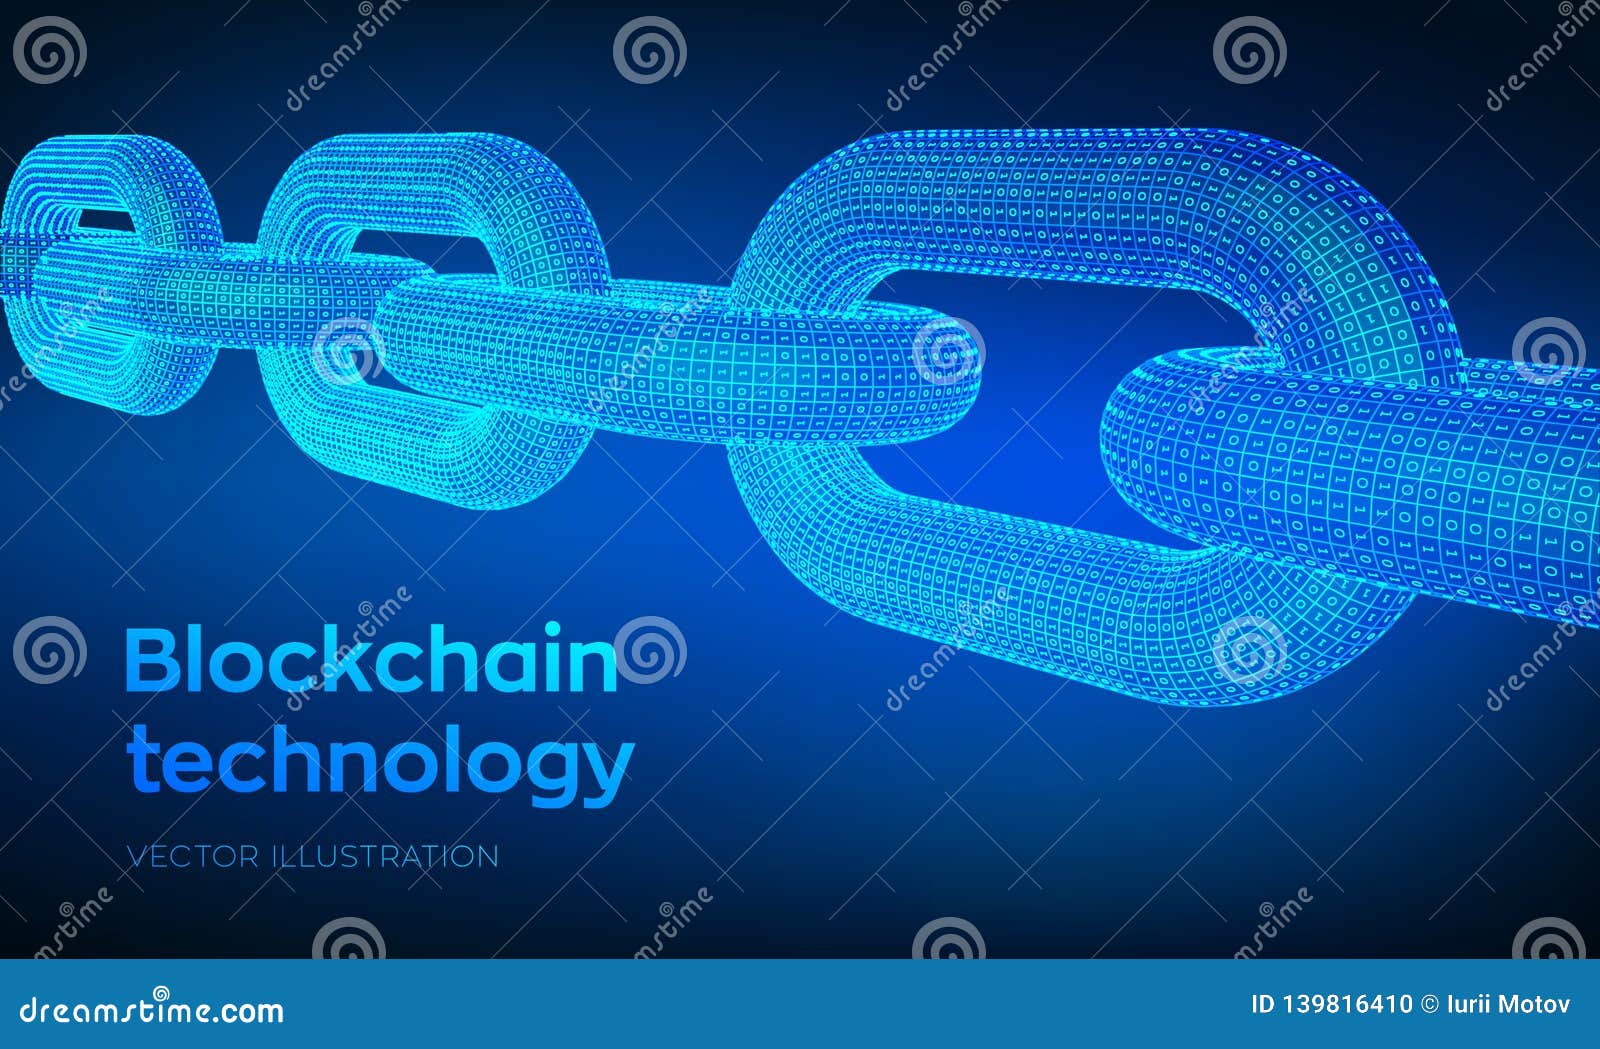 can a blockchain link